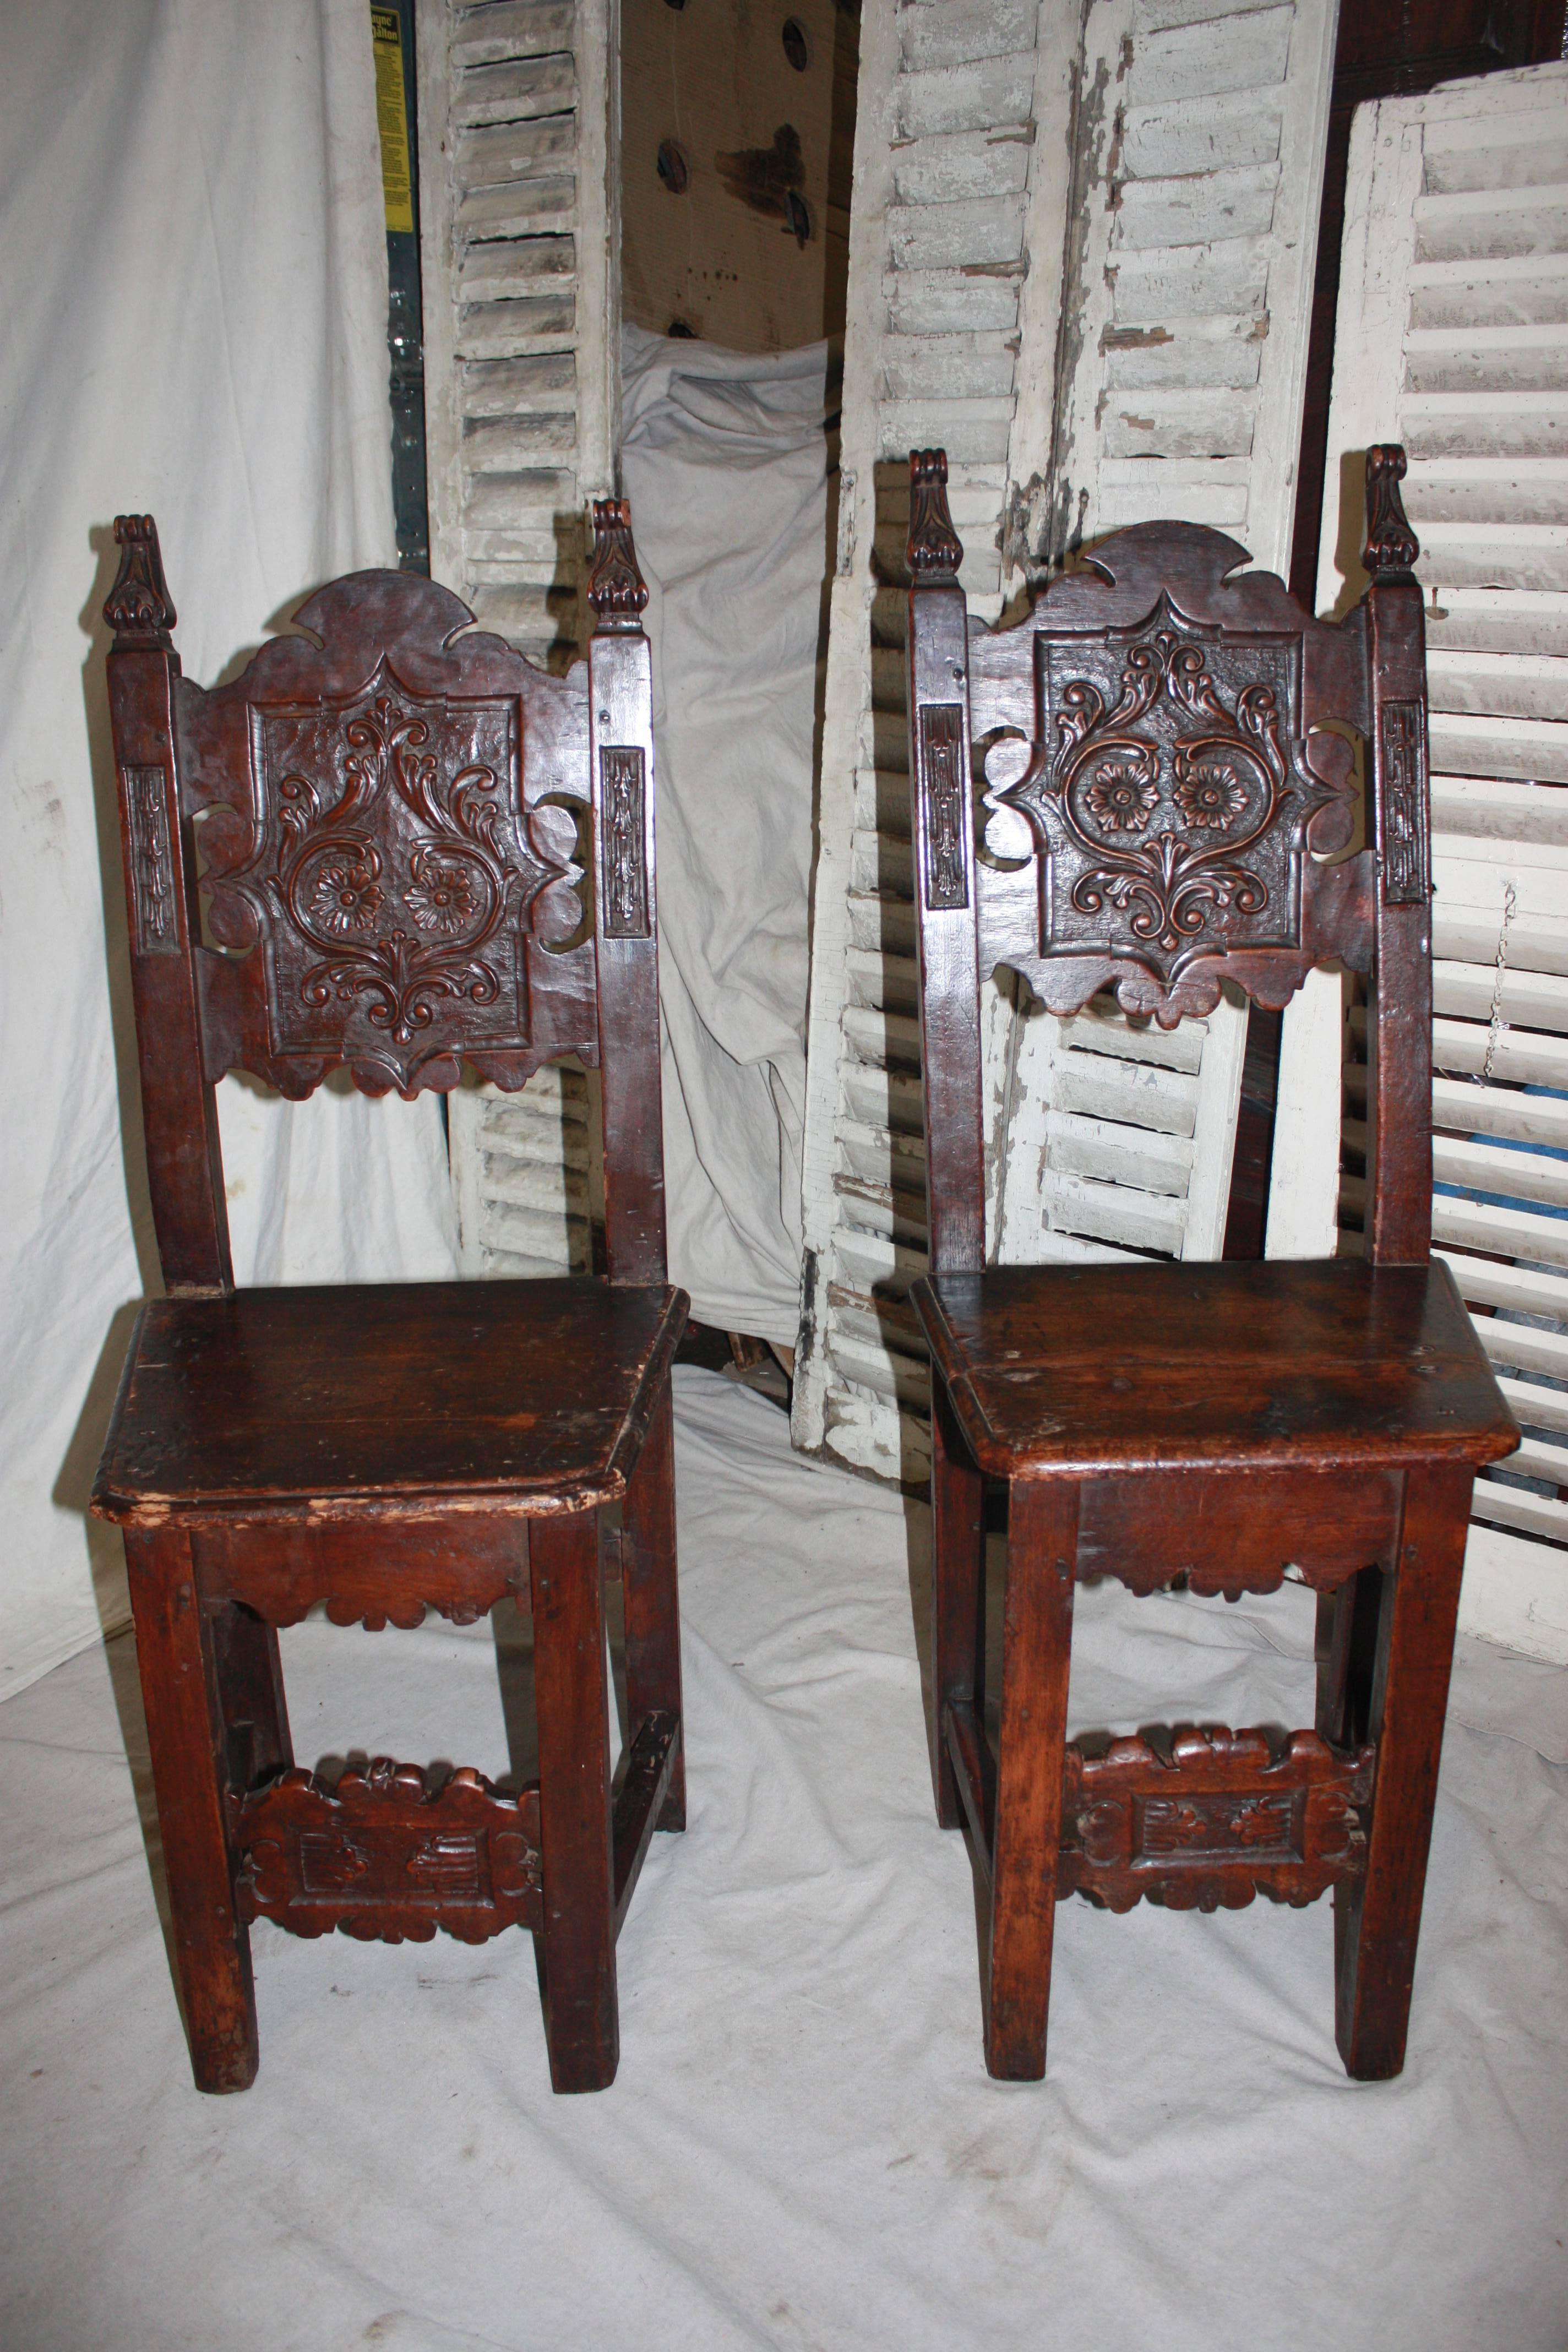 Pair of 17th century French chairs. The wood is made of carved oak.